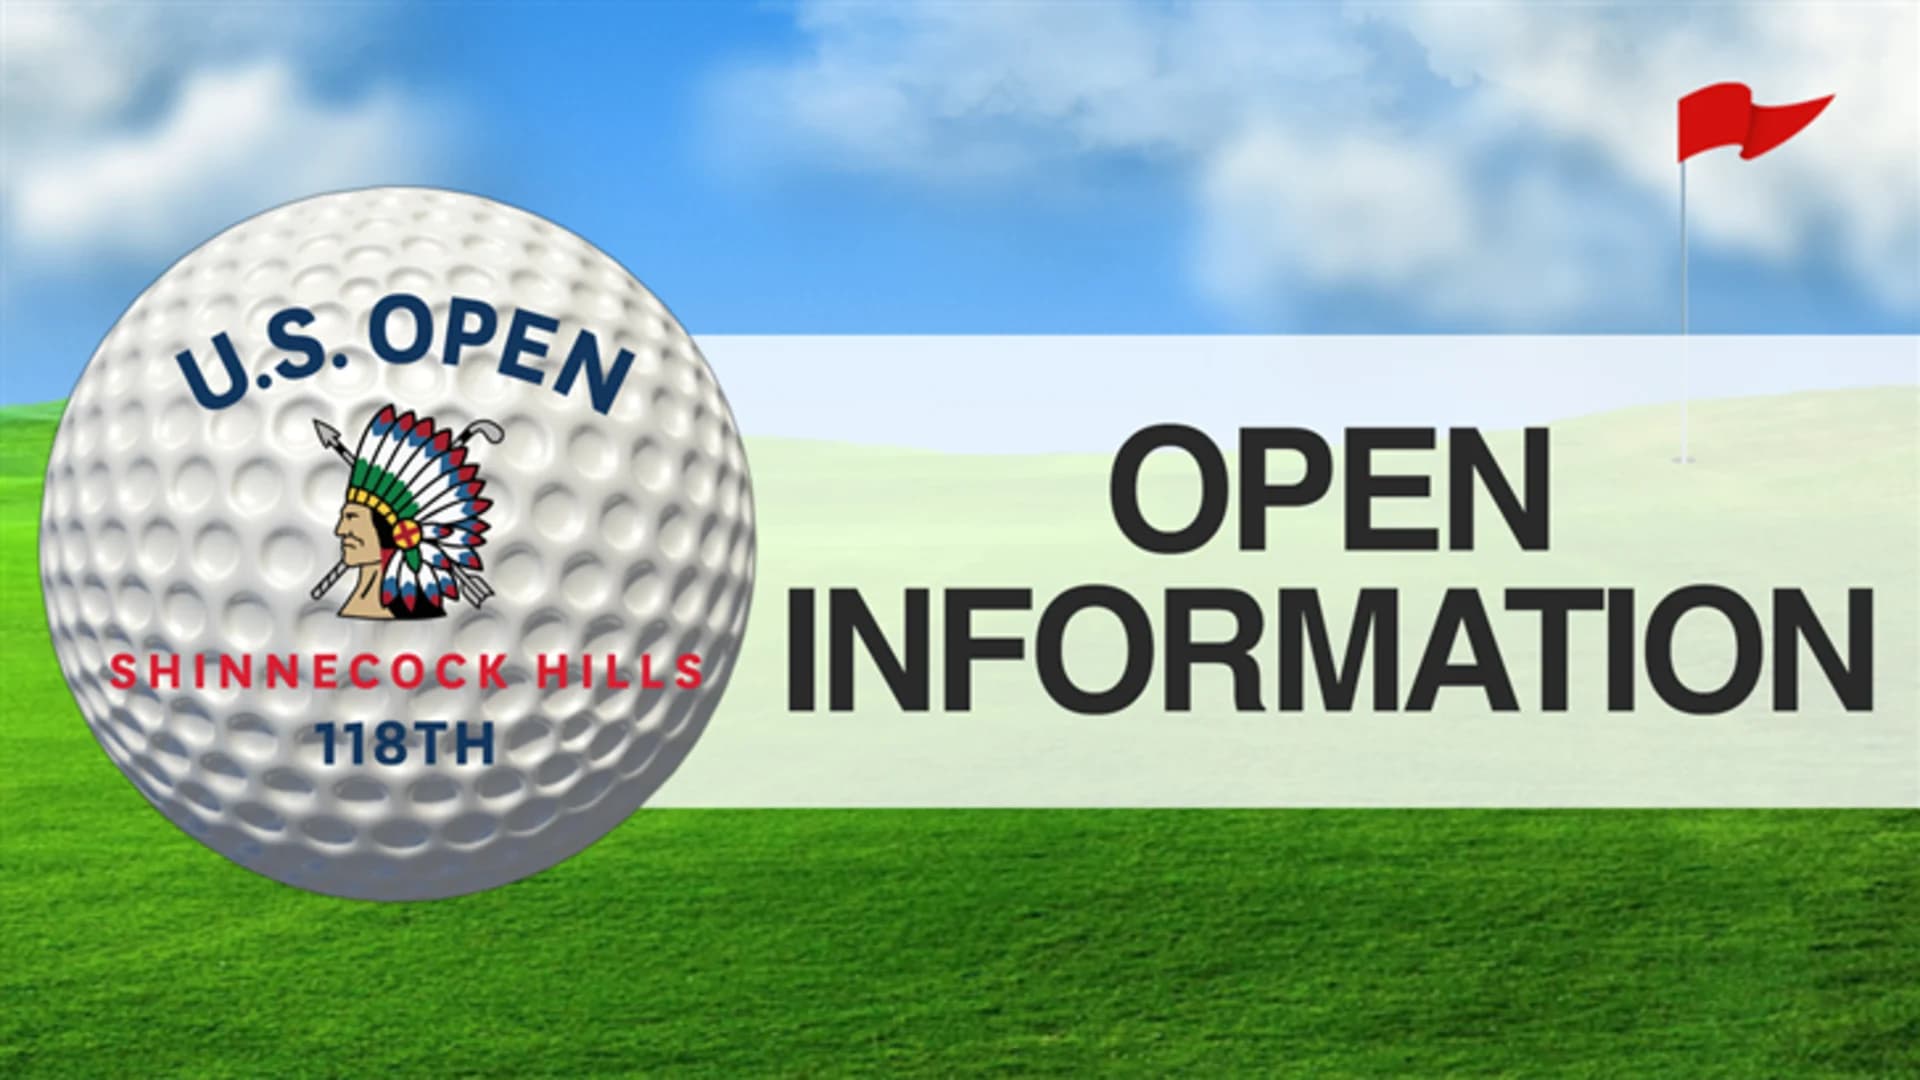 U.S. Open Information and Links